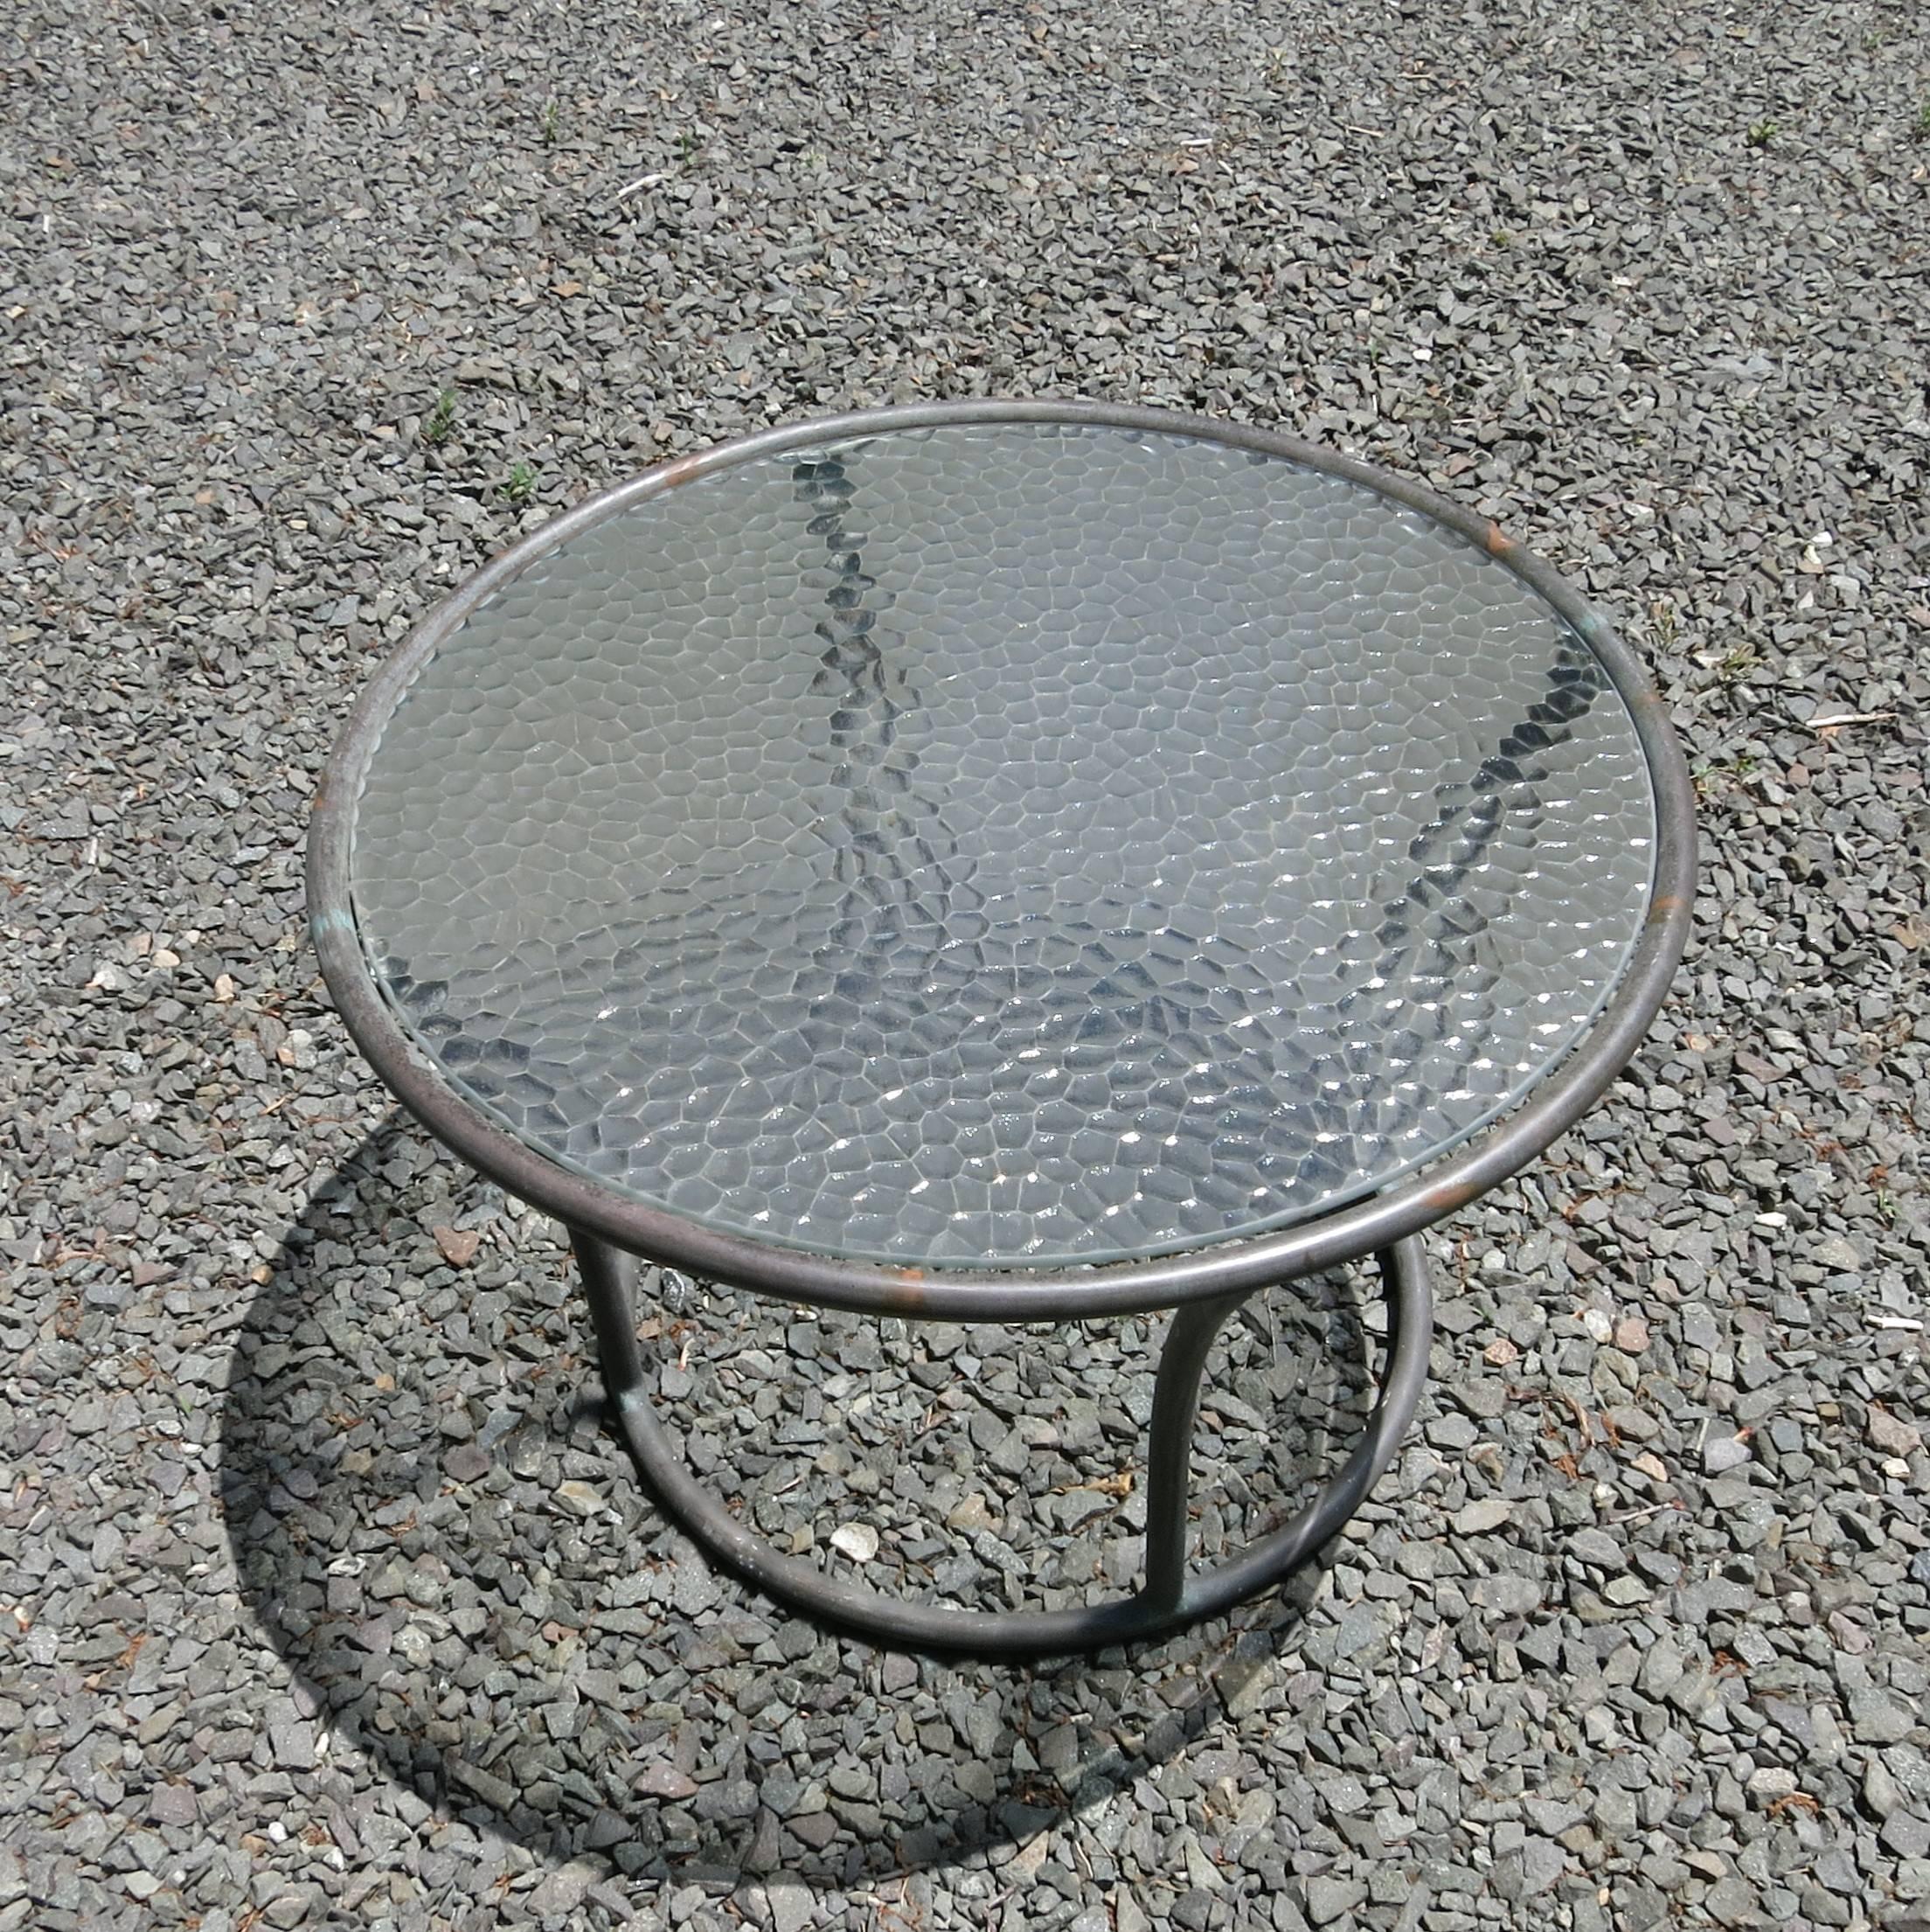 For sale is a Kipp Stewart designed tubular bronze side table for Terra. Excellent condition with original pebble glass top. Measures: 24 1/2